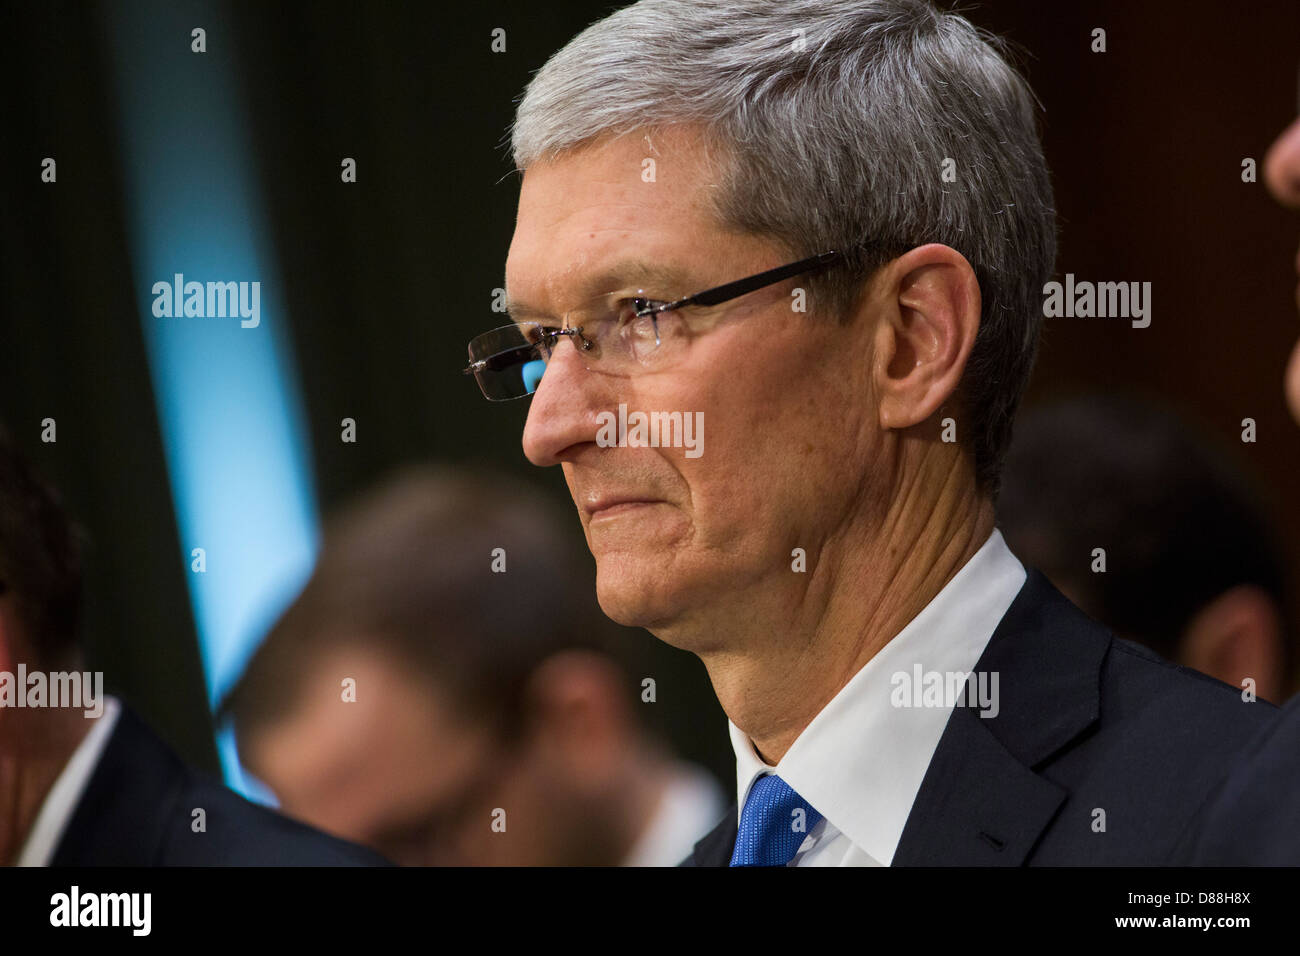 983 Tim Cook Images, Stock Photos, 3D objects, & Vectors